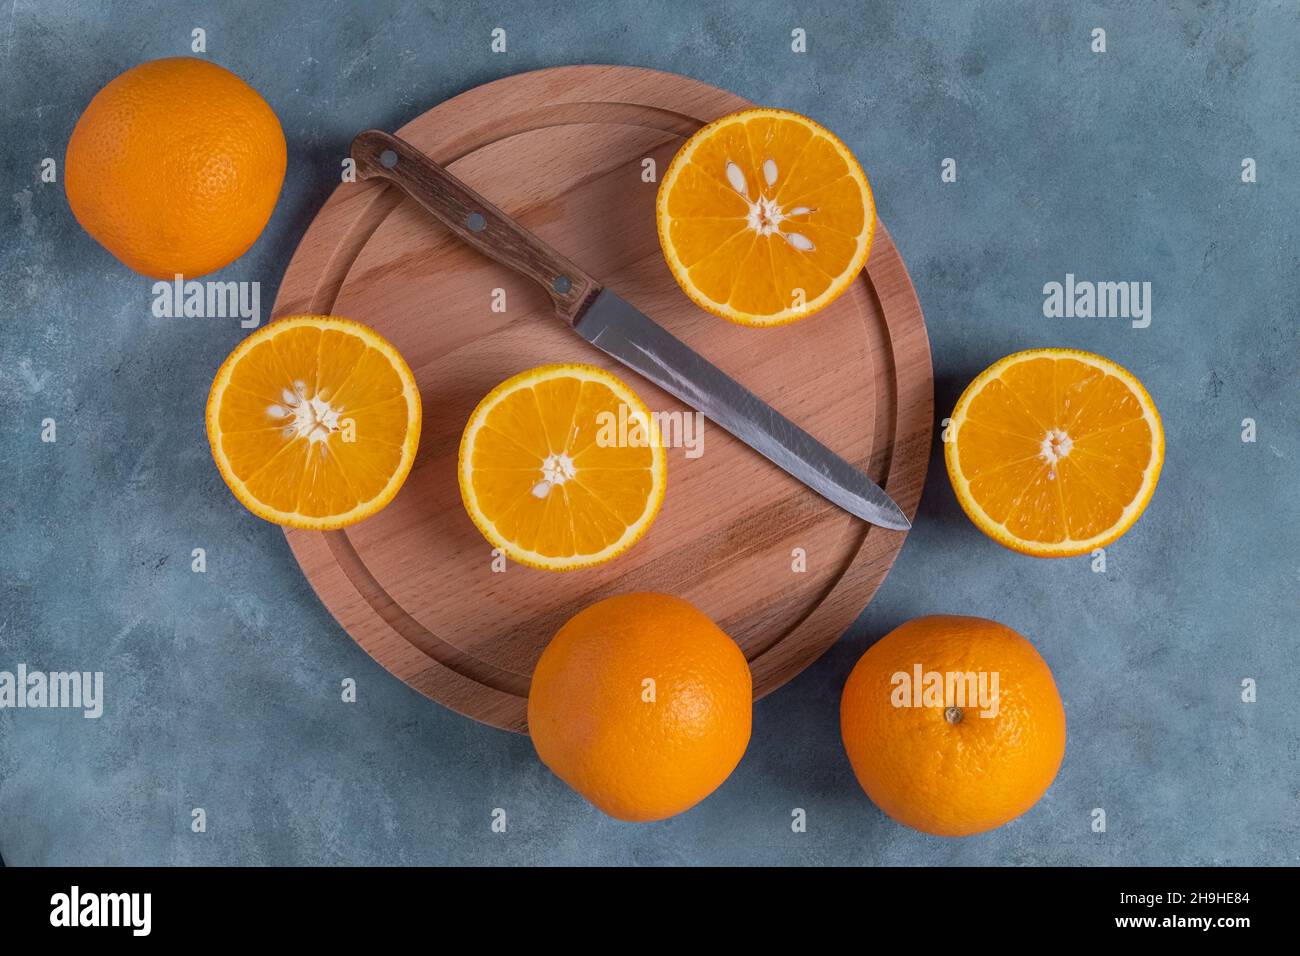 Close-up top view of ripe whole and halved oranges. Stock Photo